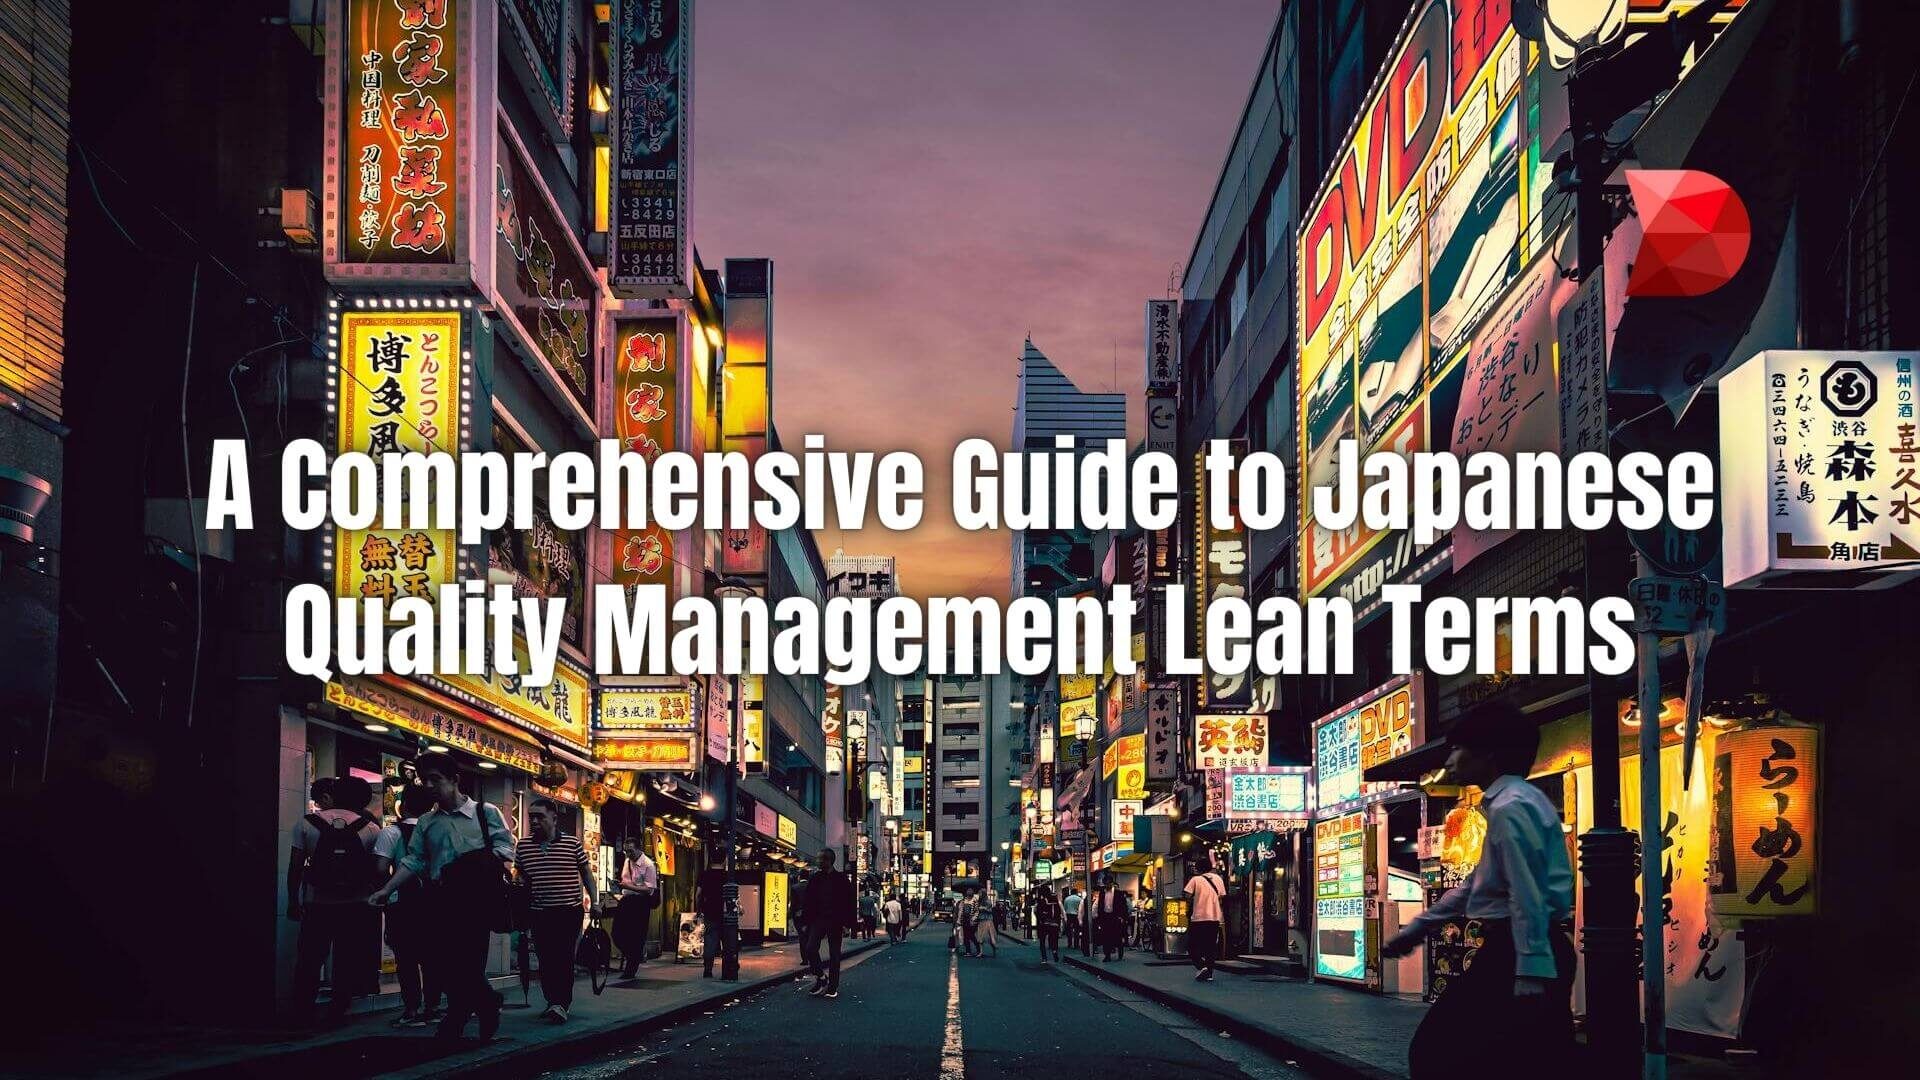 Dive into the world of Japanese Quality Management Lean Terms with our guide! Learn key concepts and strategies for optimizing efficiency.